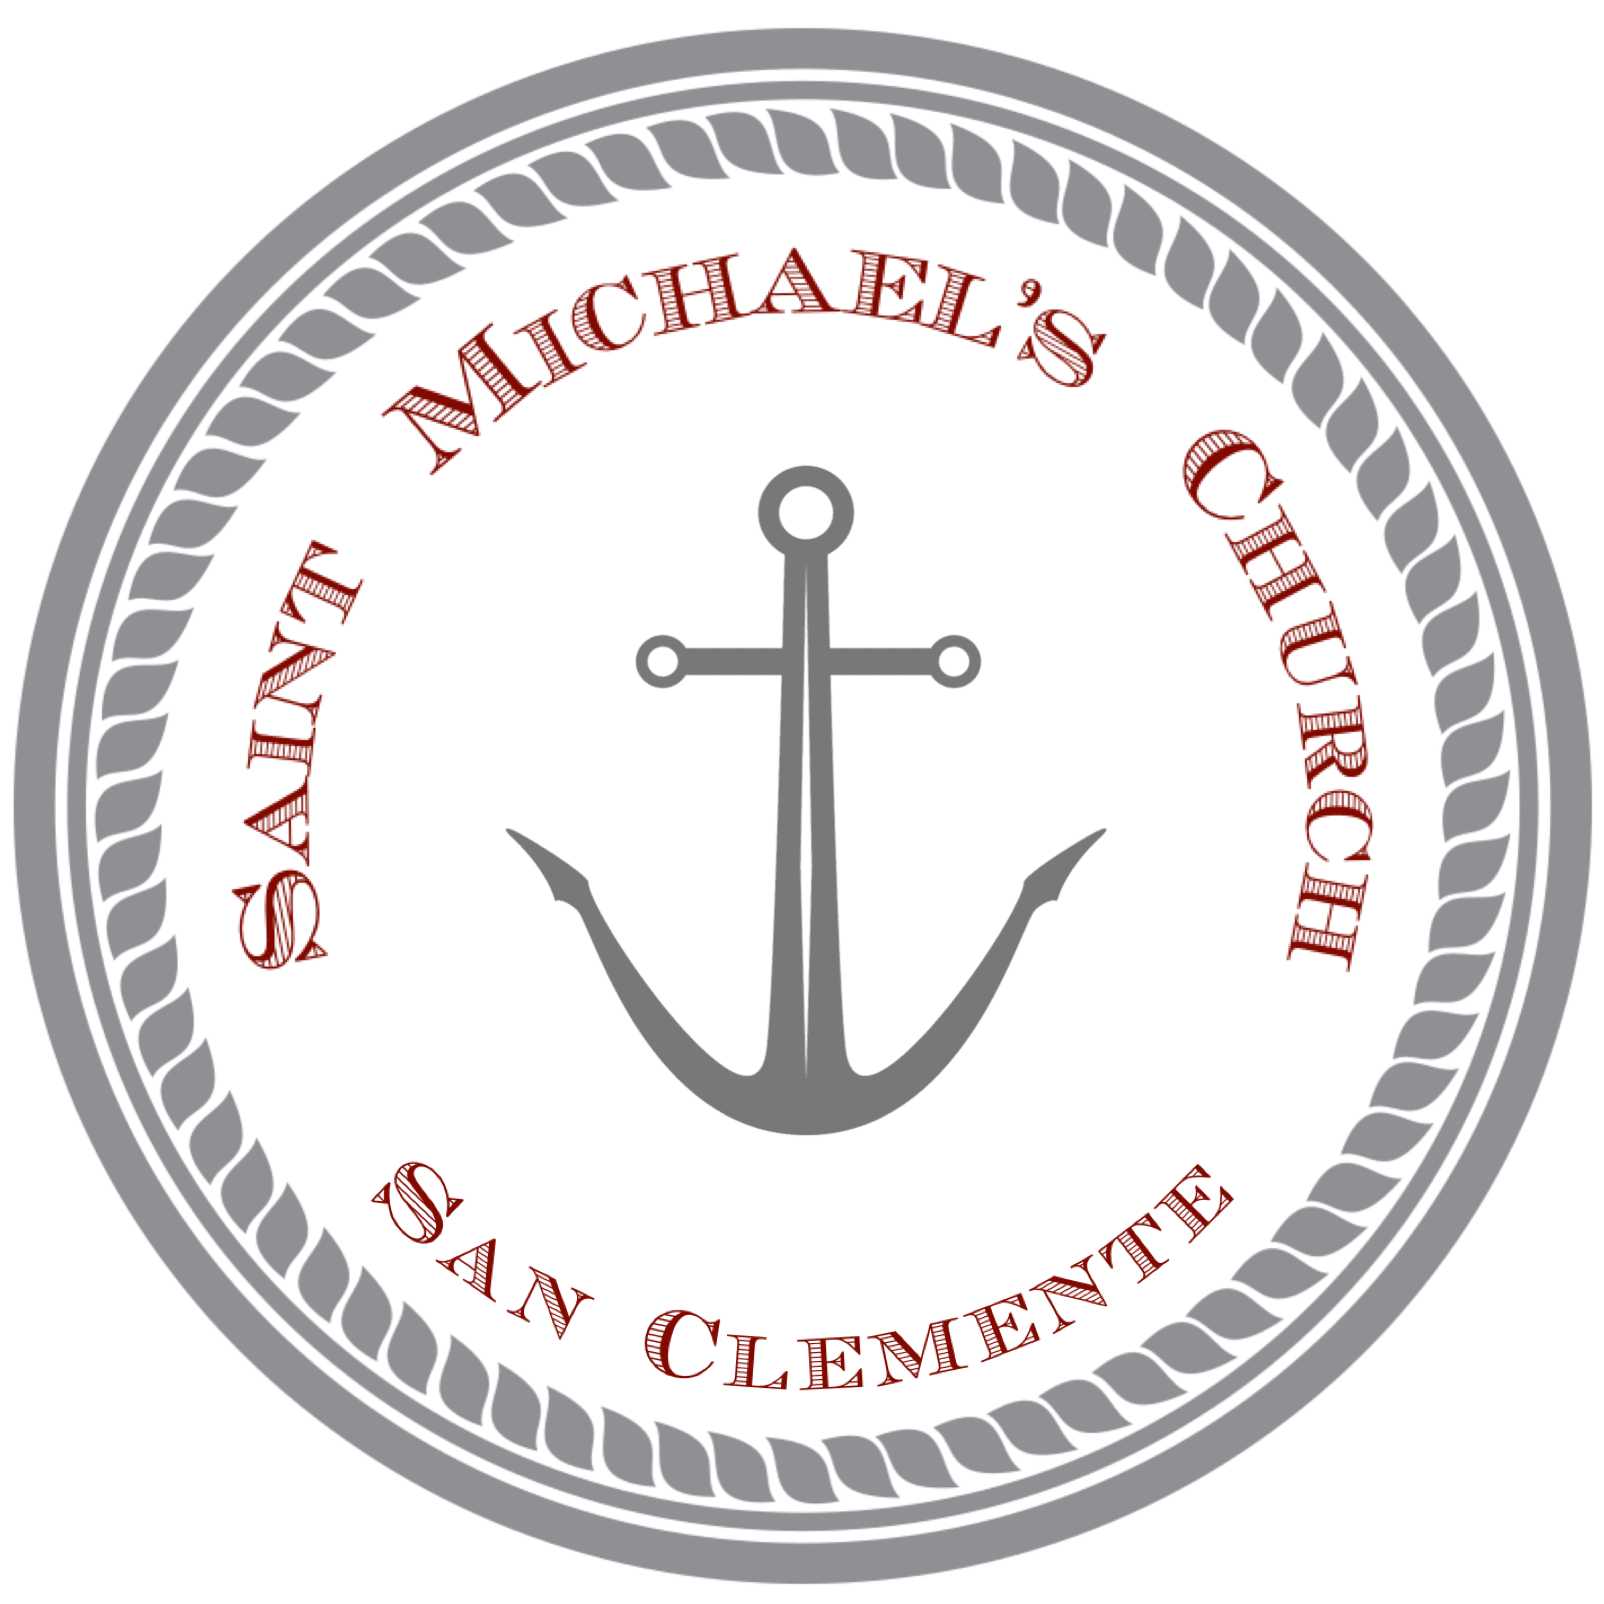 The St. Michaels Society